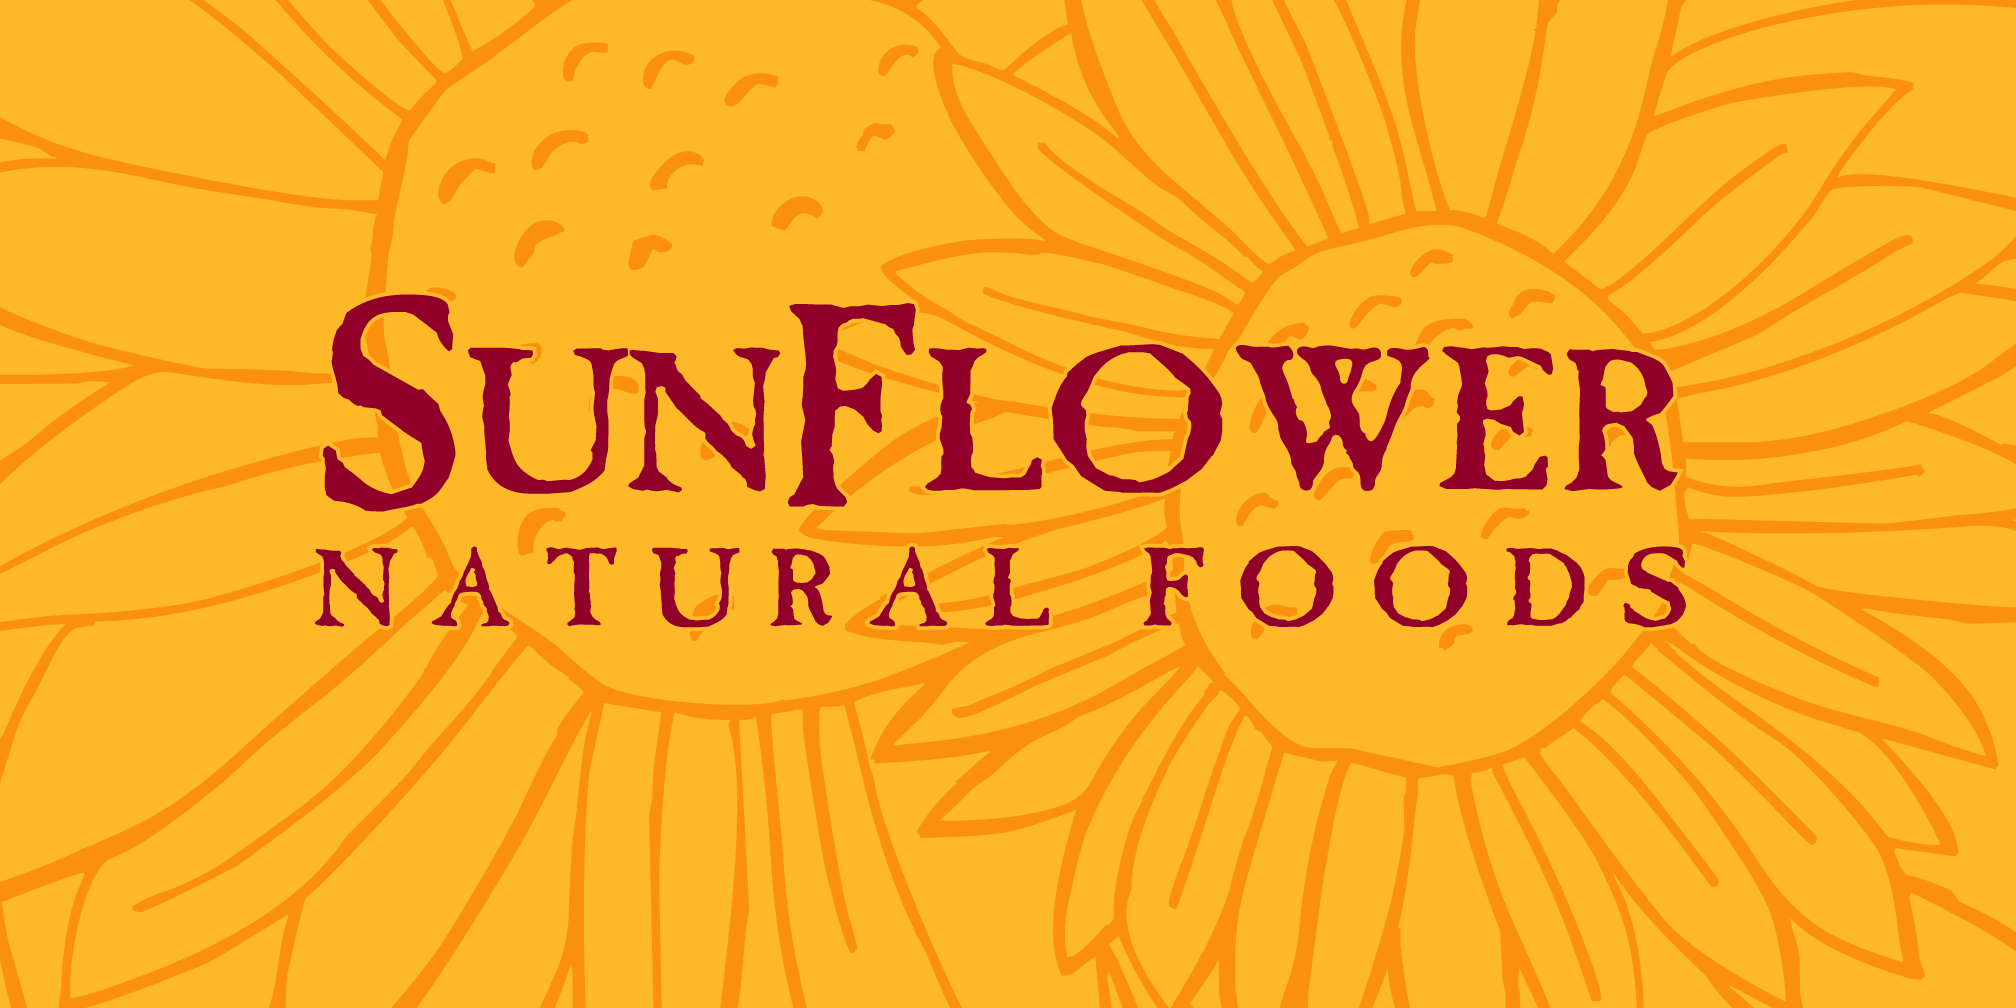 sunflower natural foods gift certificate front side